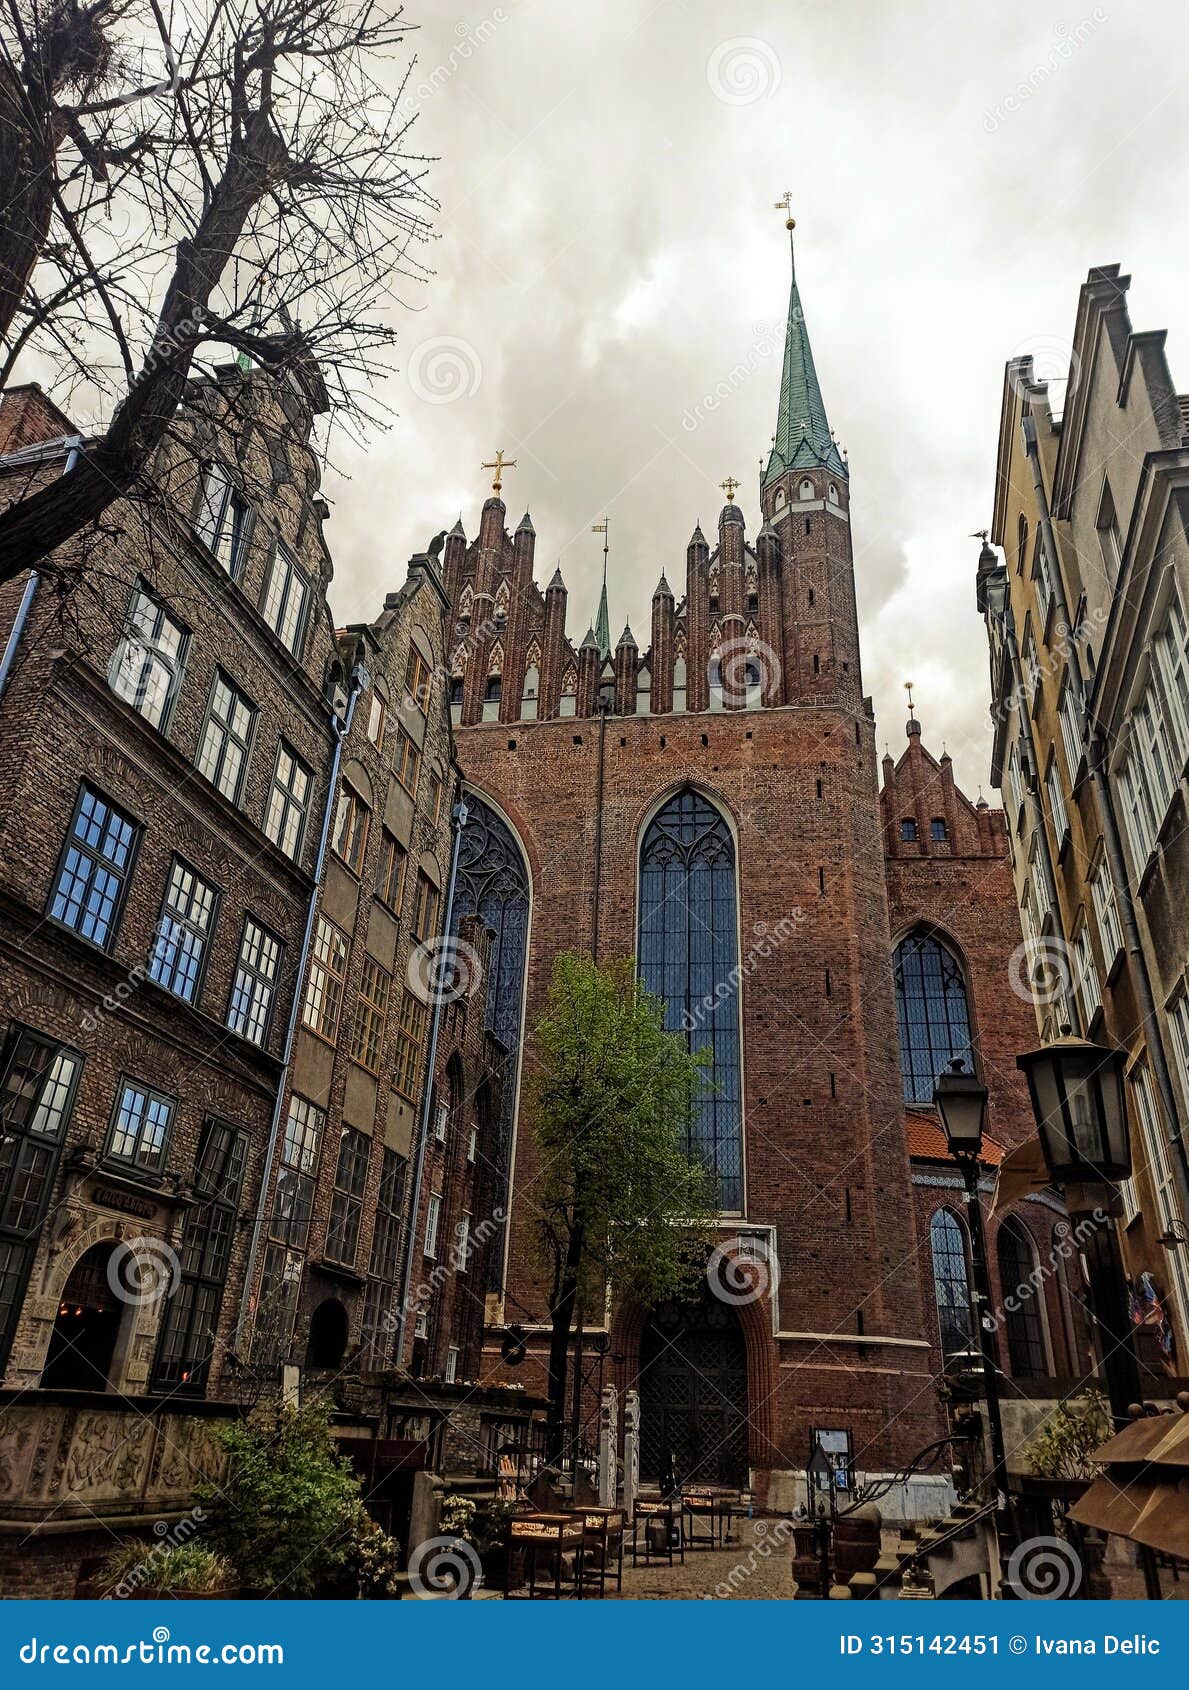 the catholic church of st. mary, or mariacka basilica, is the largest brick building in the world.  gdansk, poland